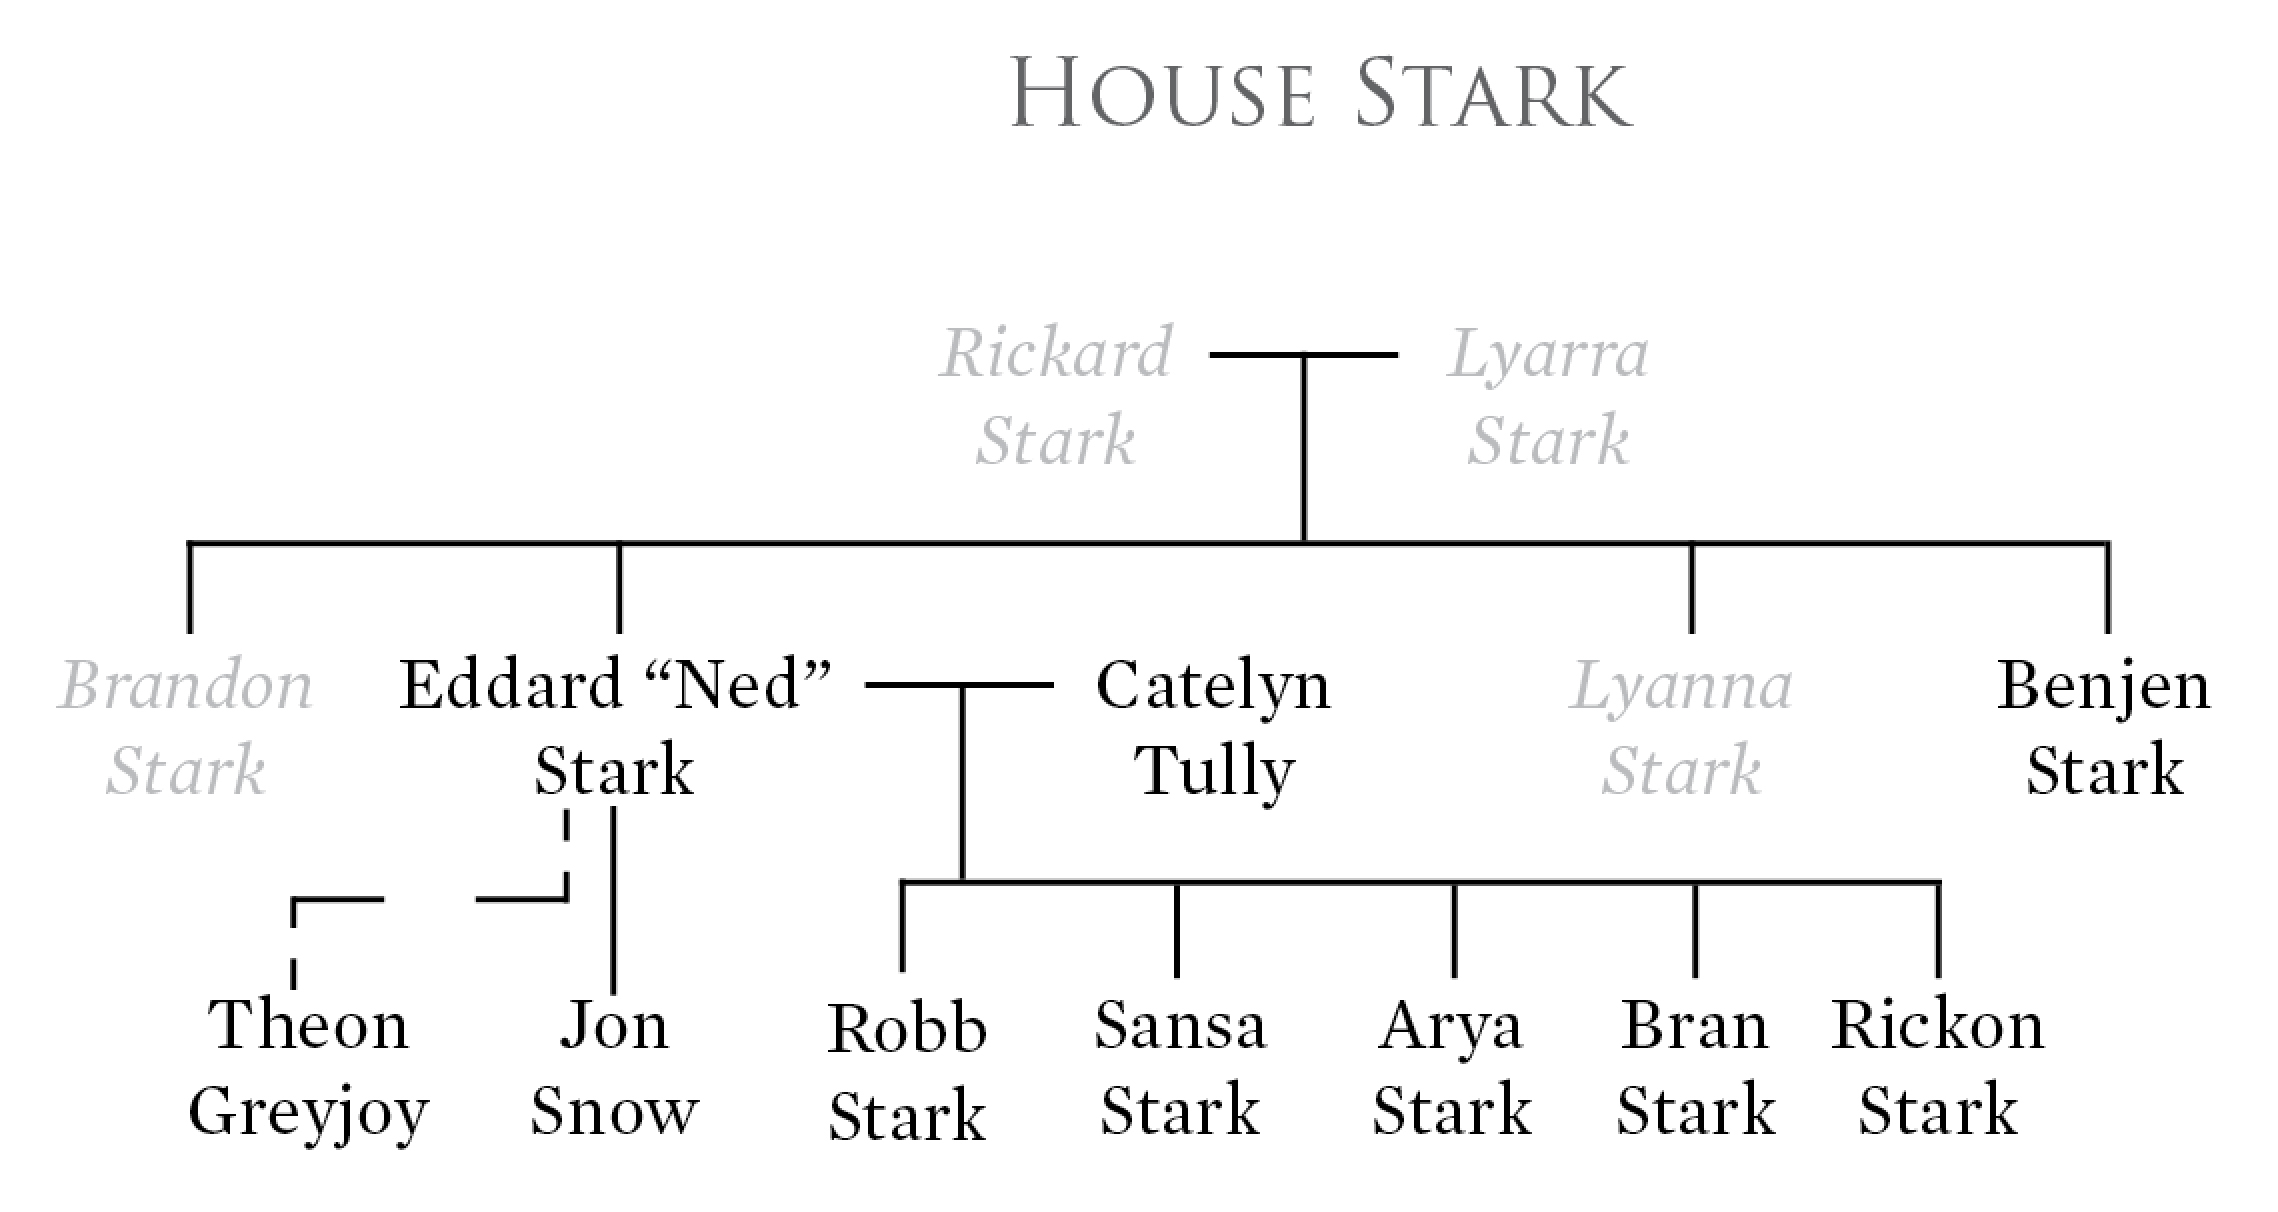 Game Of Thrones Diagram Fire And Blood The Spoiler Free Game Of Thrones Family Tree